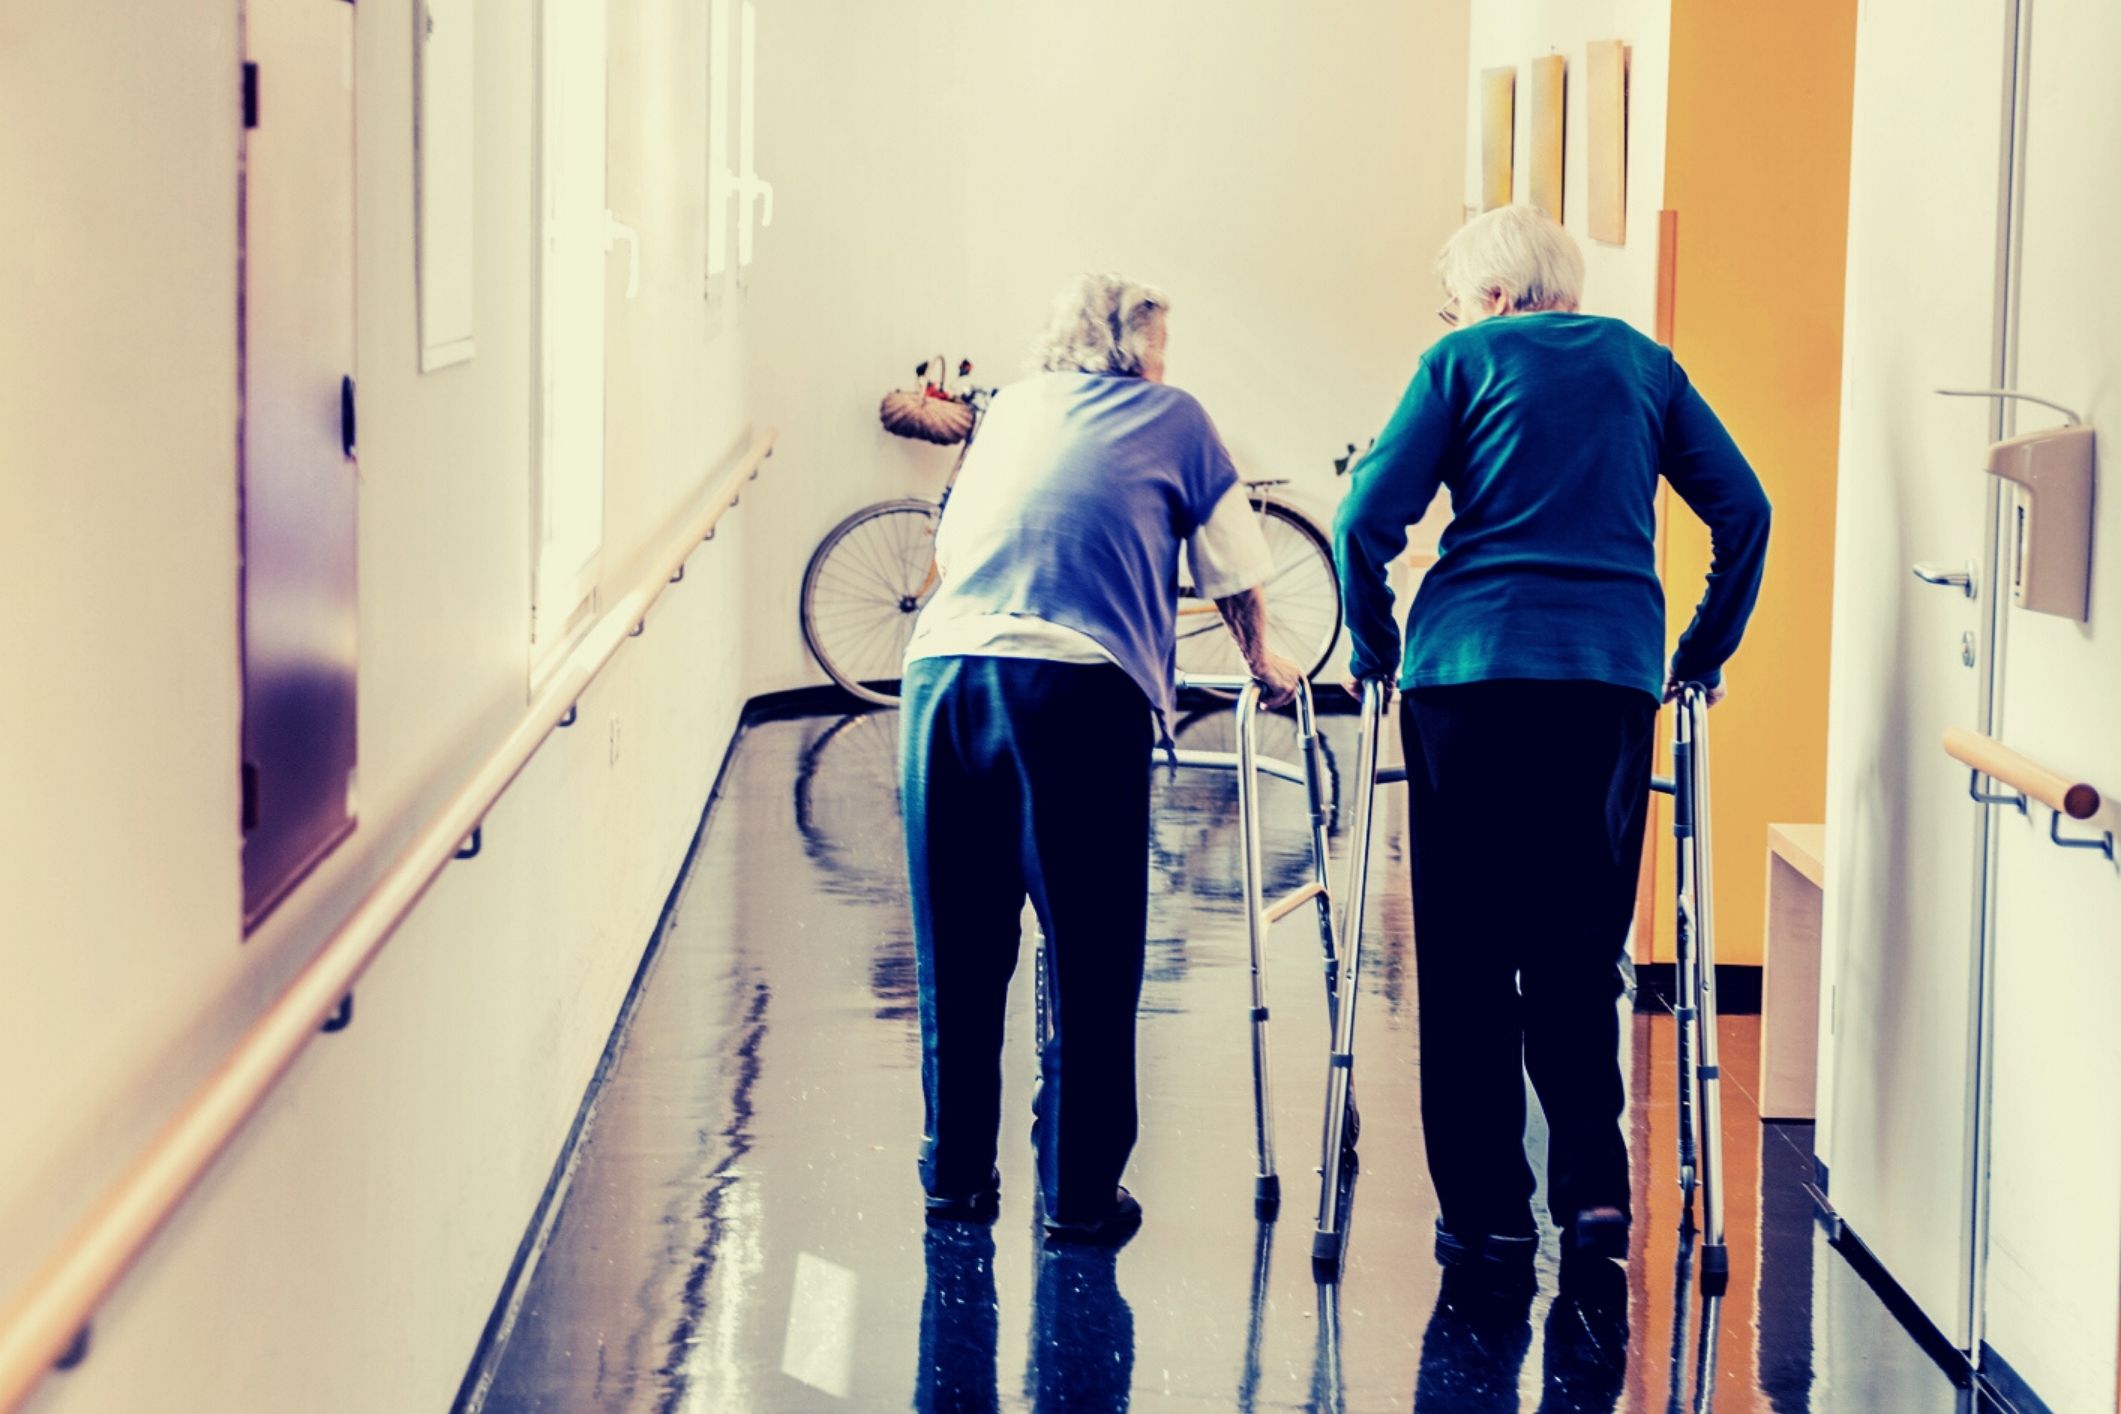 60000 staff vacancies in aged care